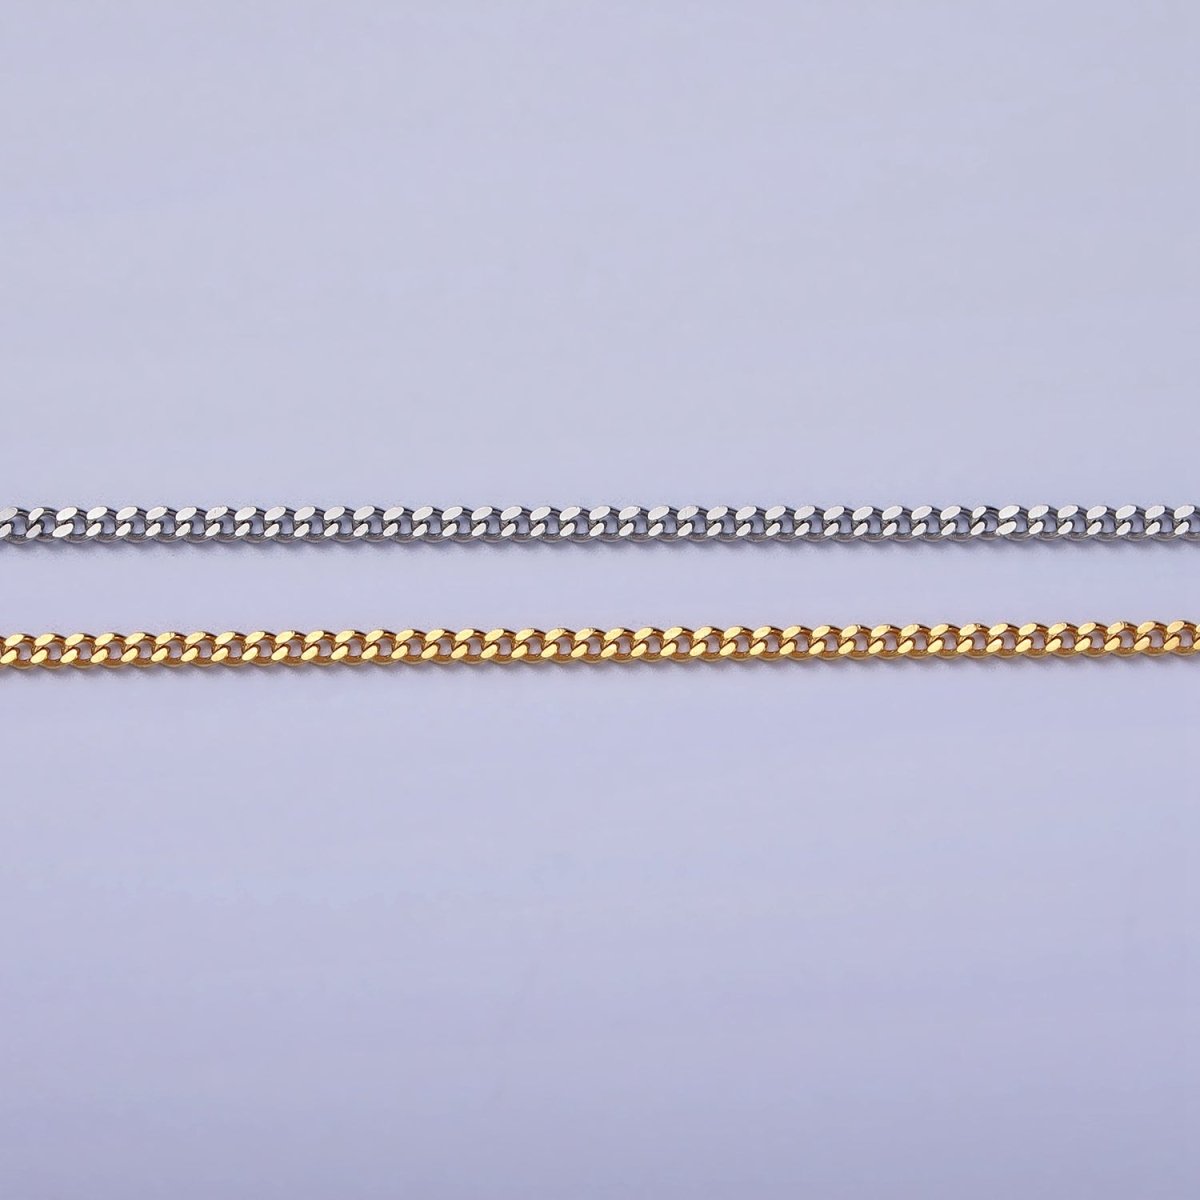 Dainty Stainless Steel Curb Chain Necklace 1.2mm Thin Gold Box Chain 17.7 inches for Jewelry Making | WA-1701 WA-1702 Clearance Pricing - DLUXCA